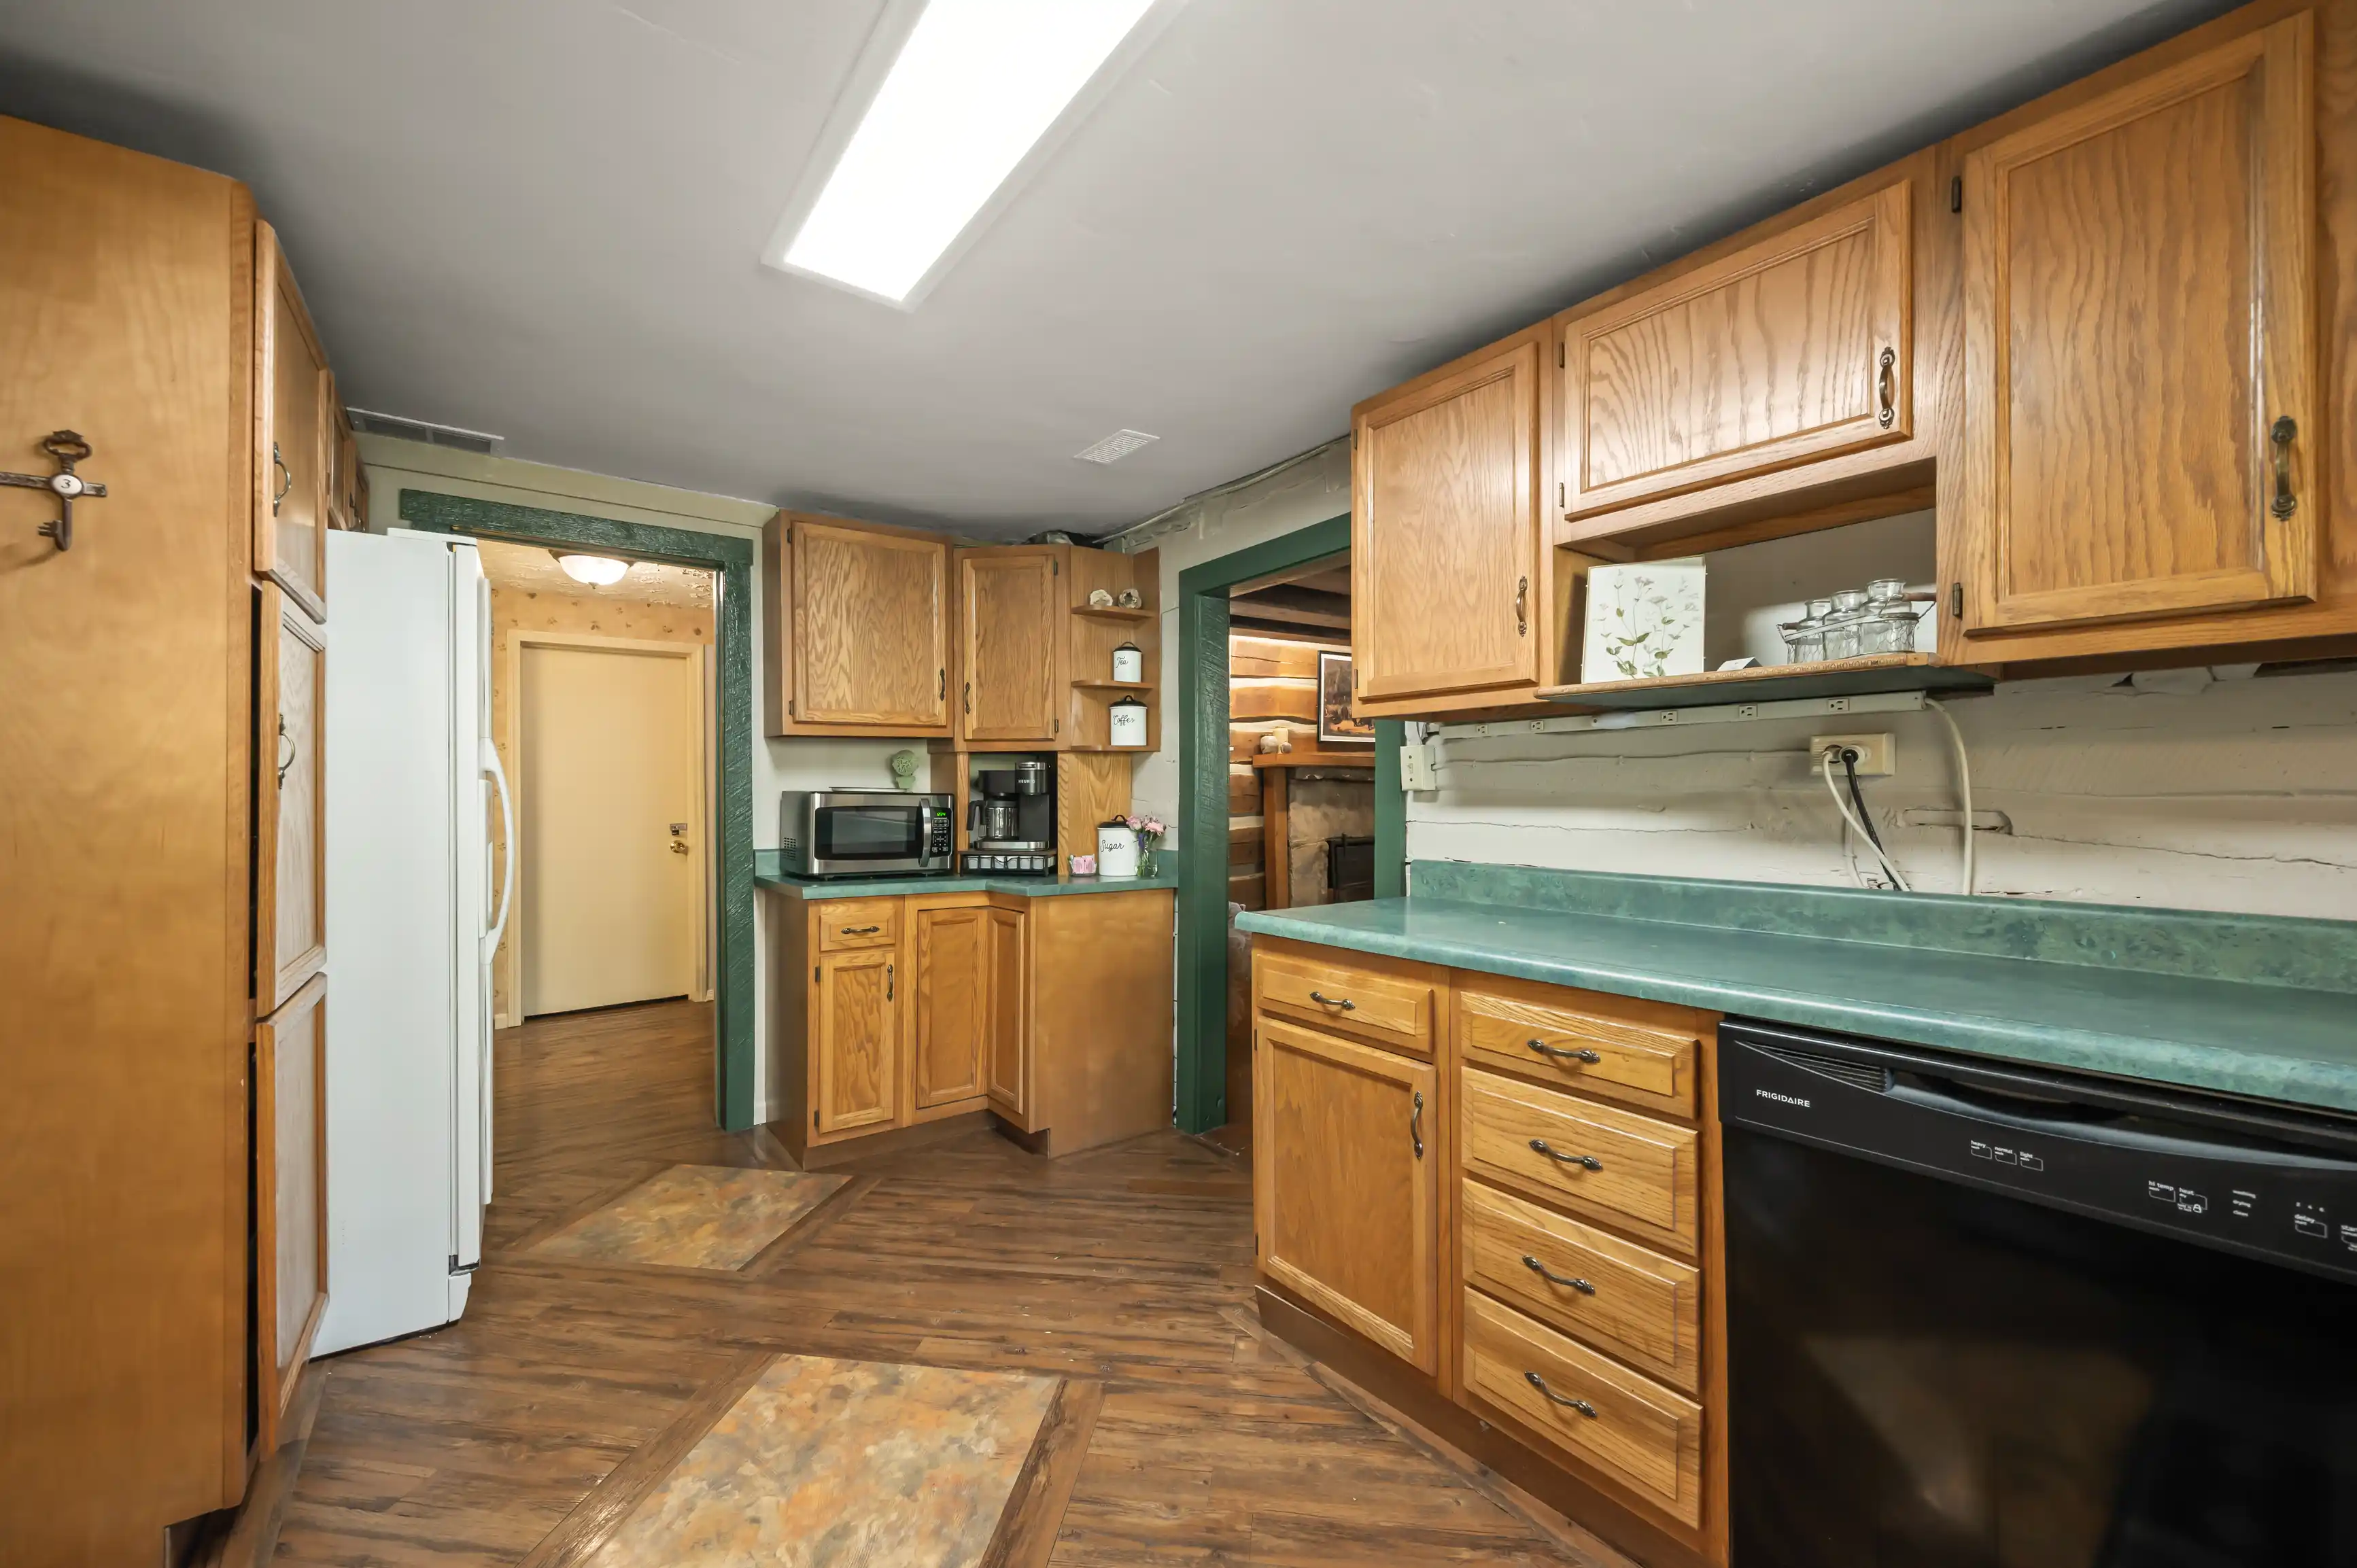 Interior of a dated kitchen with wooden cabinets, white appliances, and green countertops.